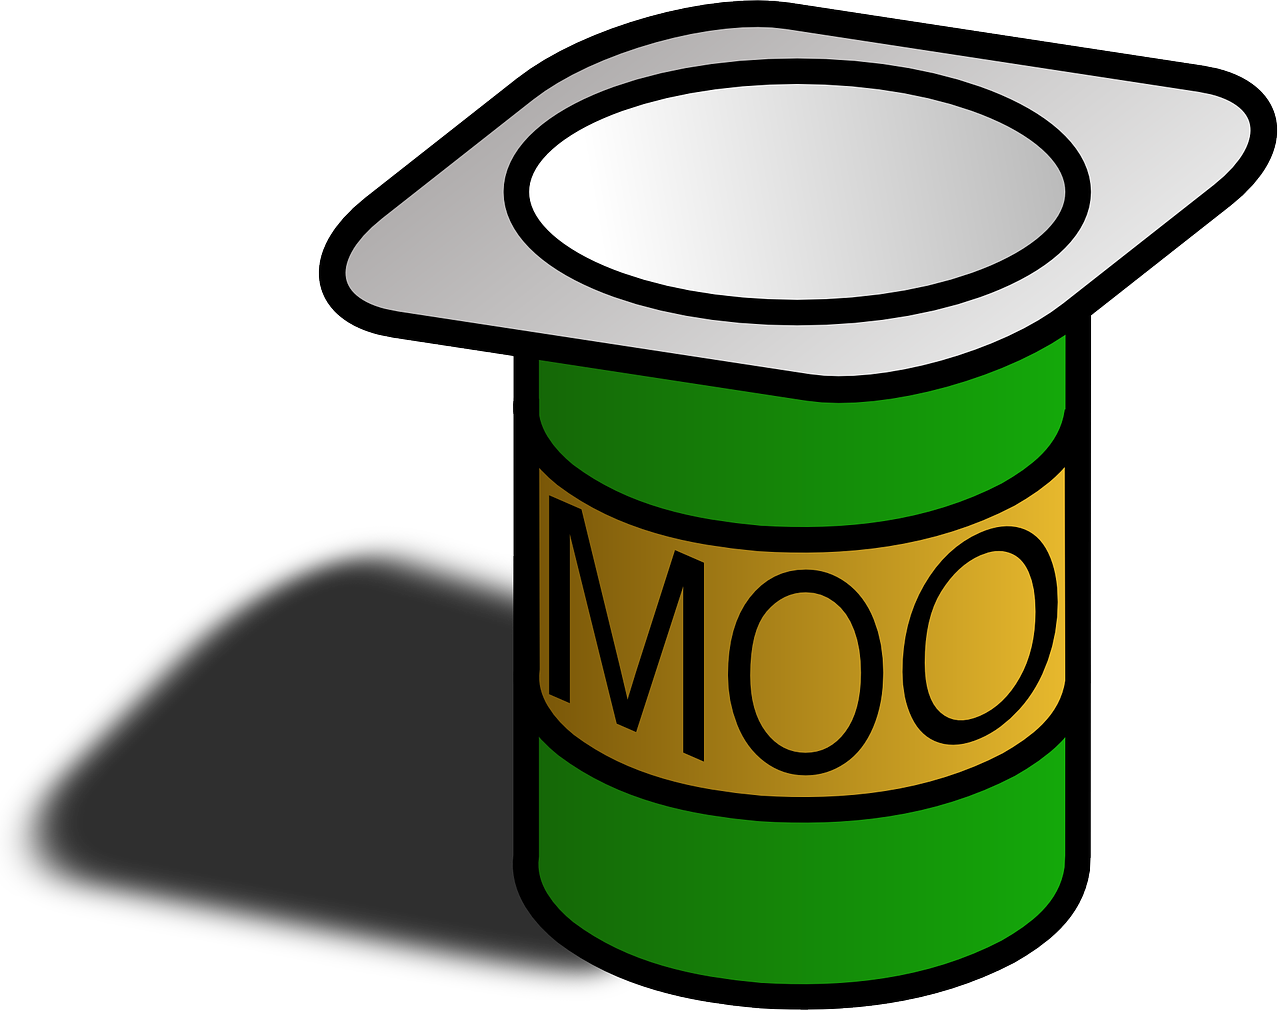 a can of moo sitting on top of a table, inspired by Mór Than, pixabay, computer art, clipart icon, alphabet soup, full of greenish liquid, in style of monkeybone